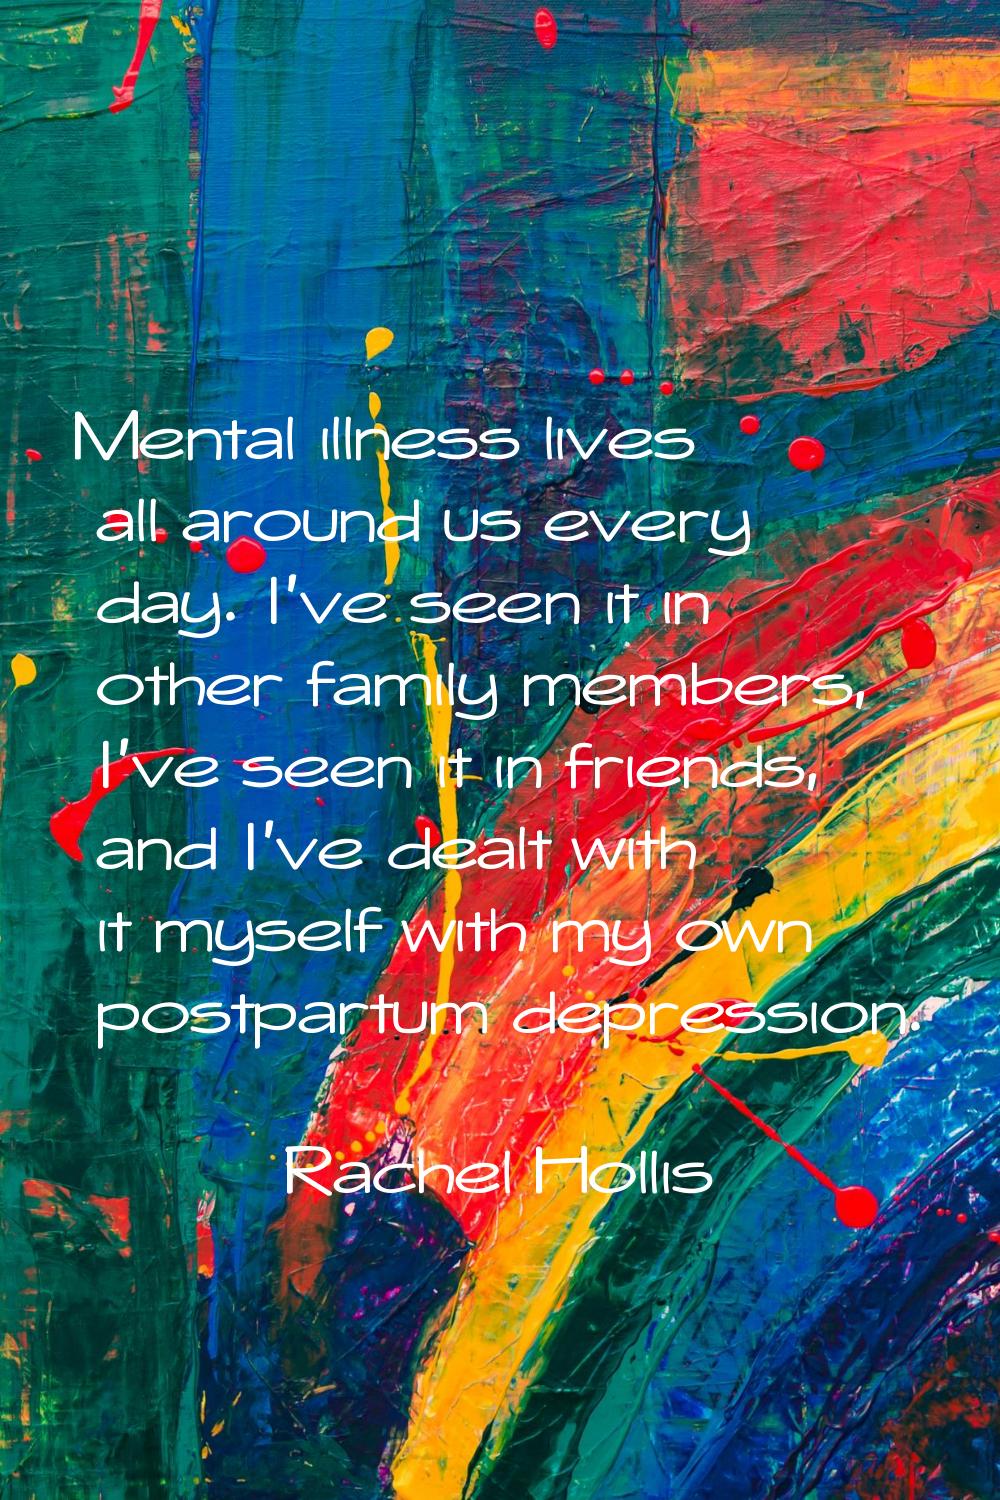 Mental illness lives all around us every day. I've seen it in other family members, I've seen it in